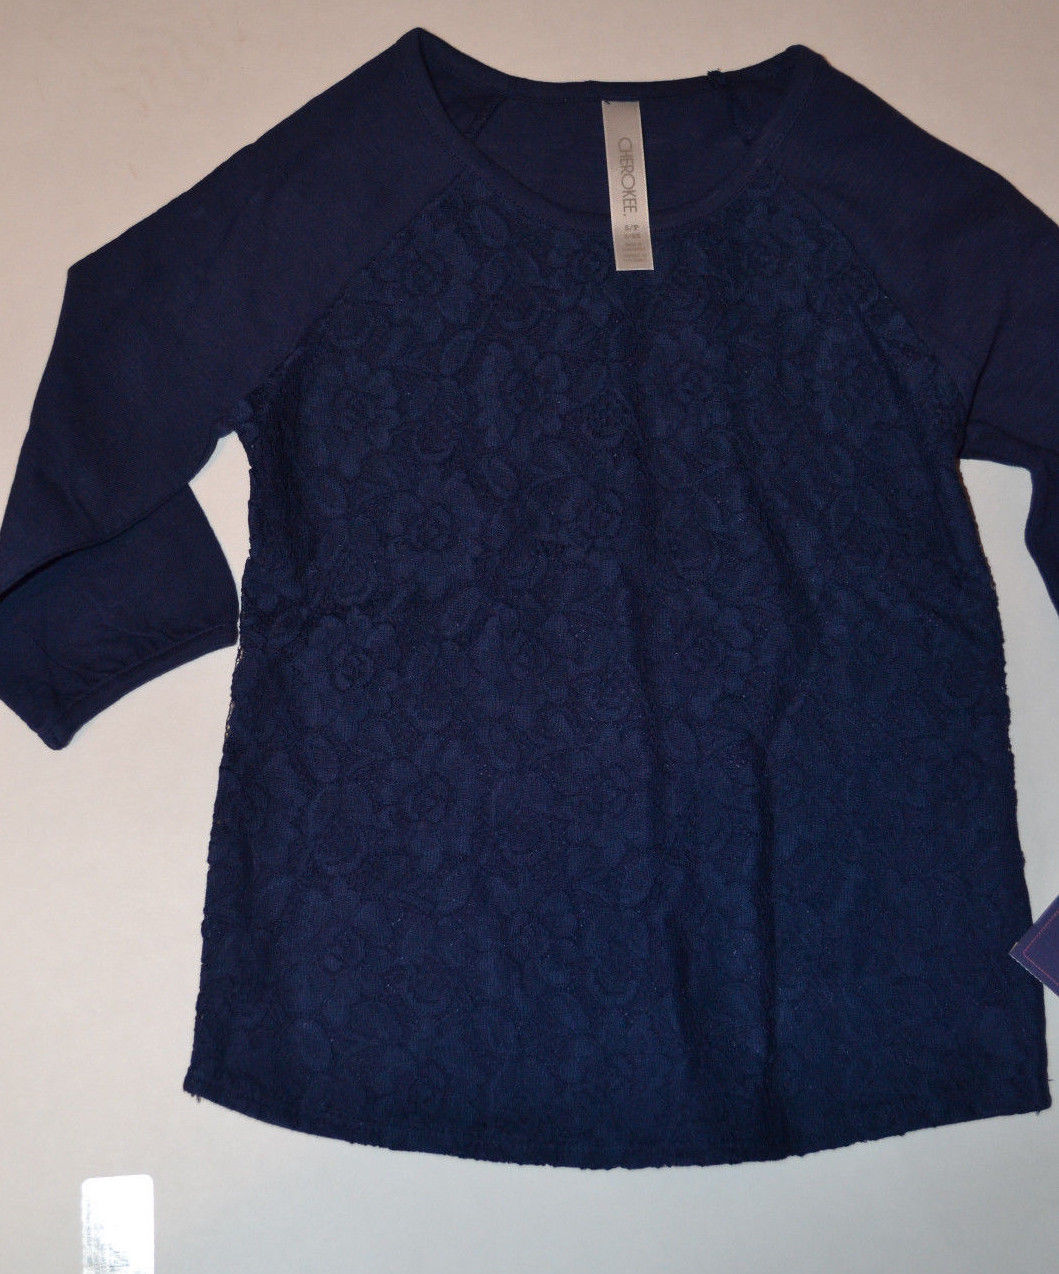 Primary image for Cherokee Girls Nite Fall Lace Top Shirt SizeS 6/6X NWT